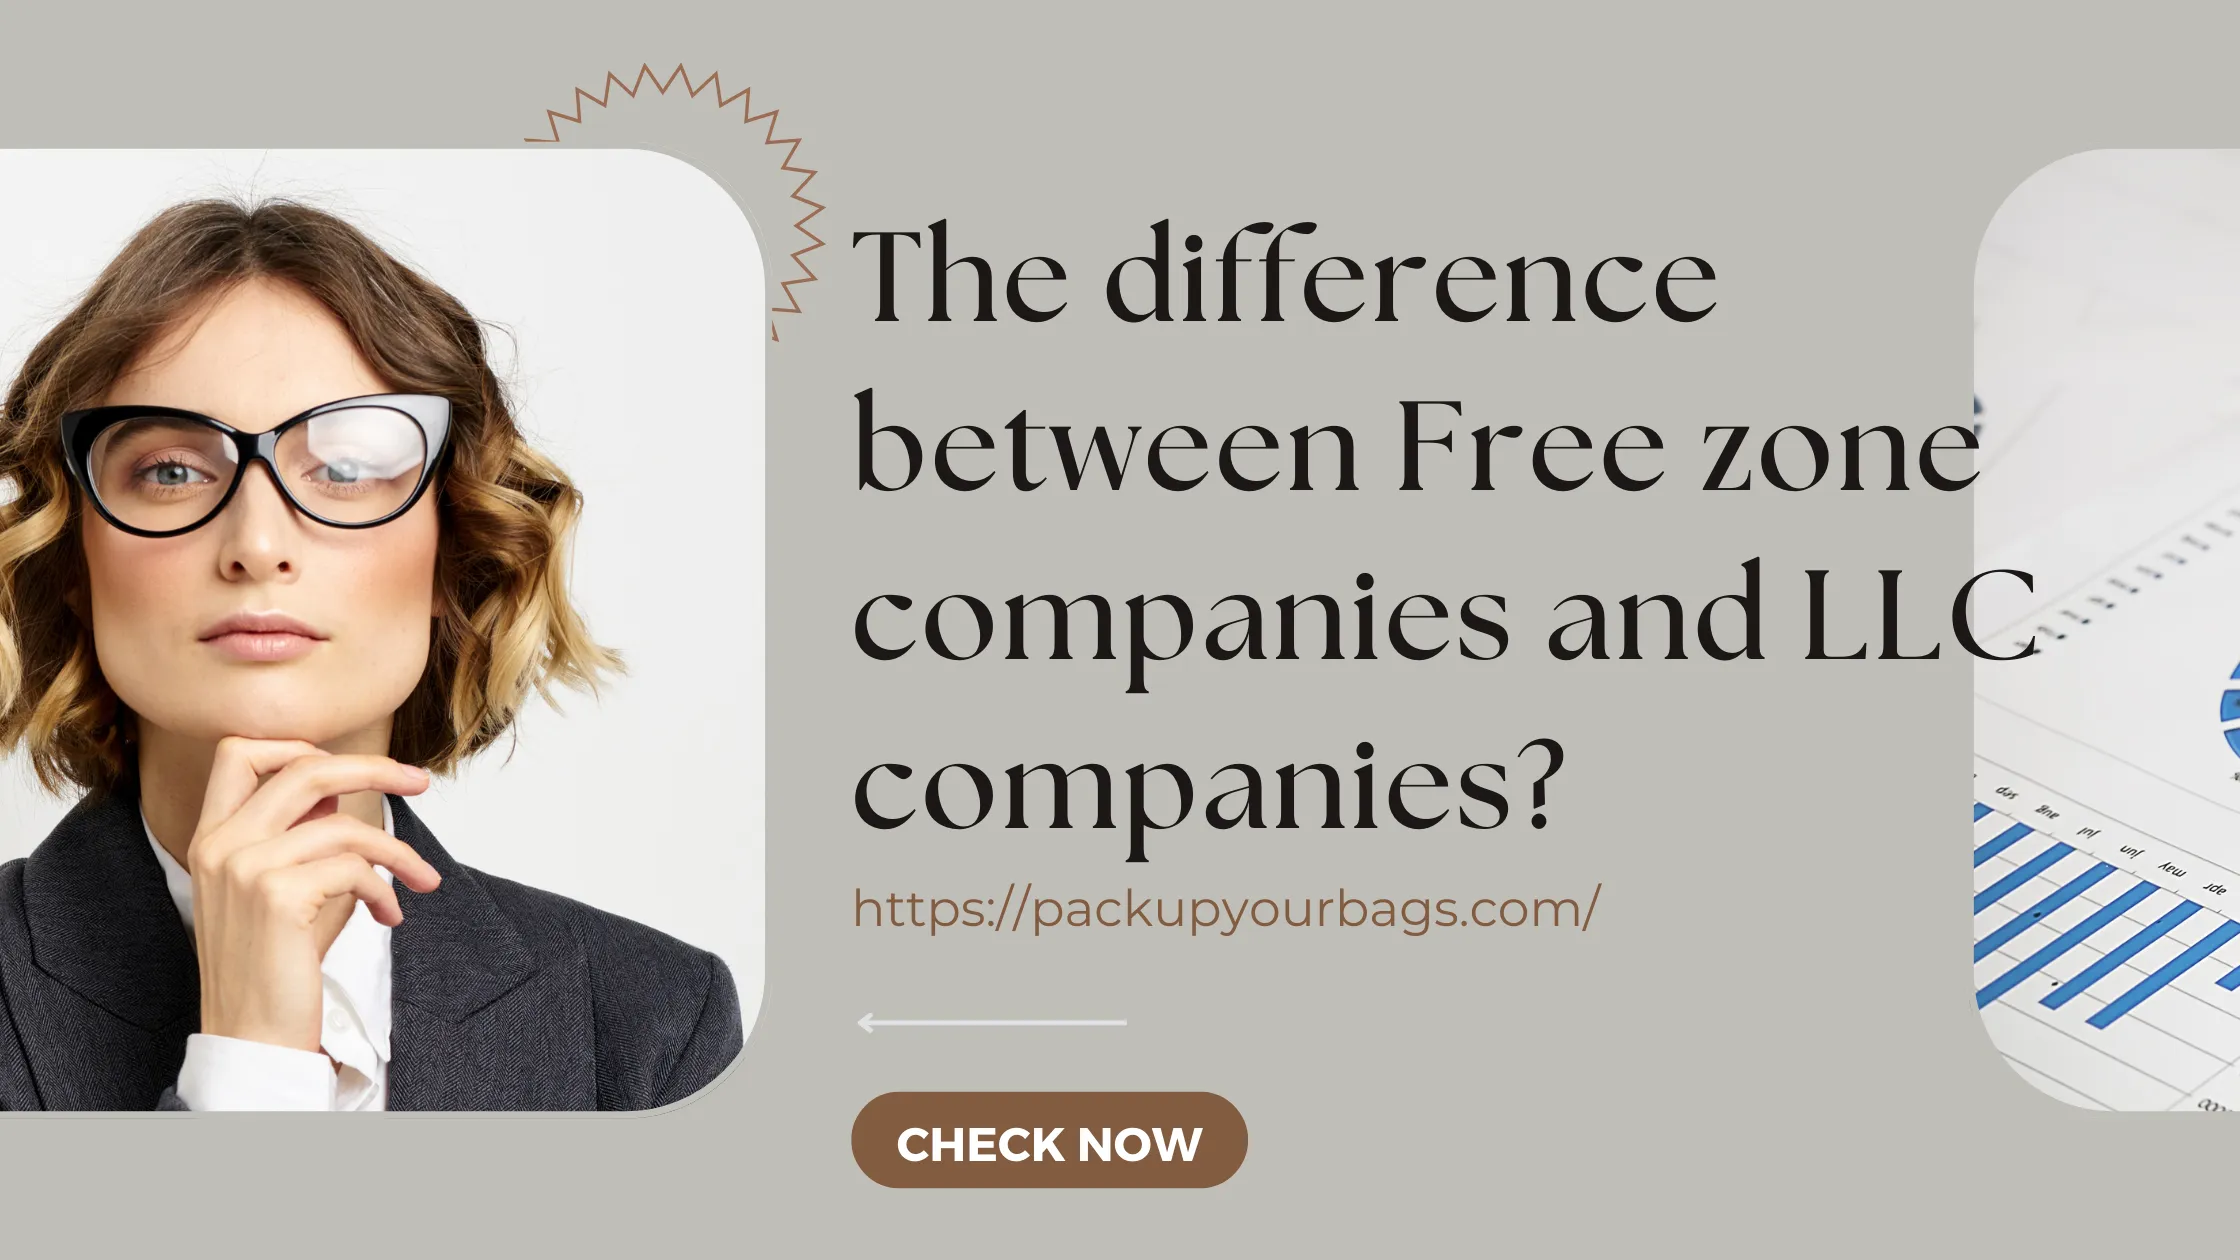 What is the difference between Free zone companies and LLC companies